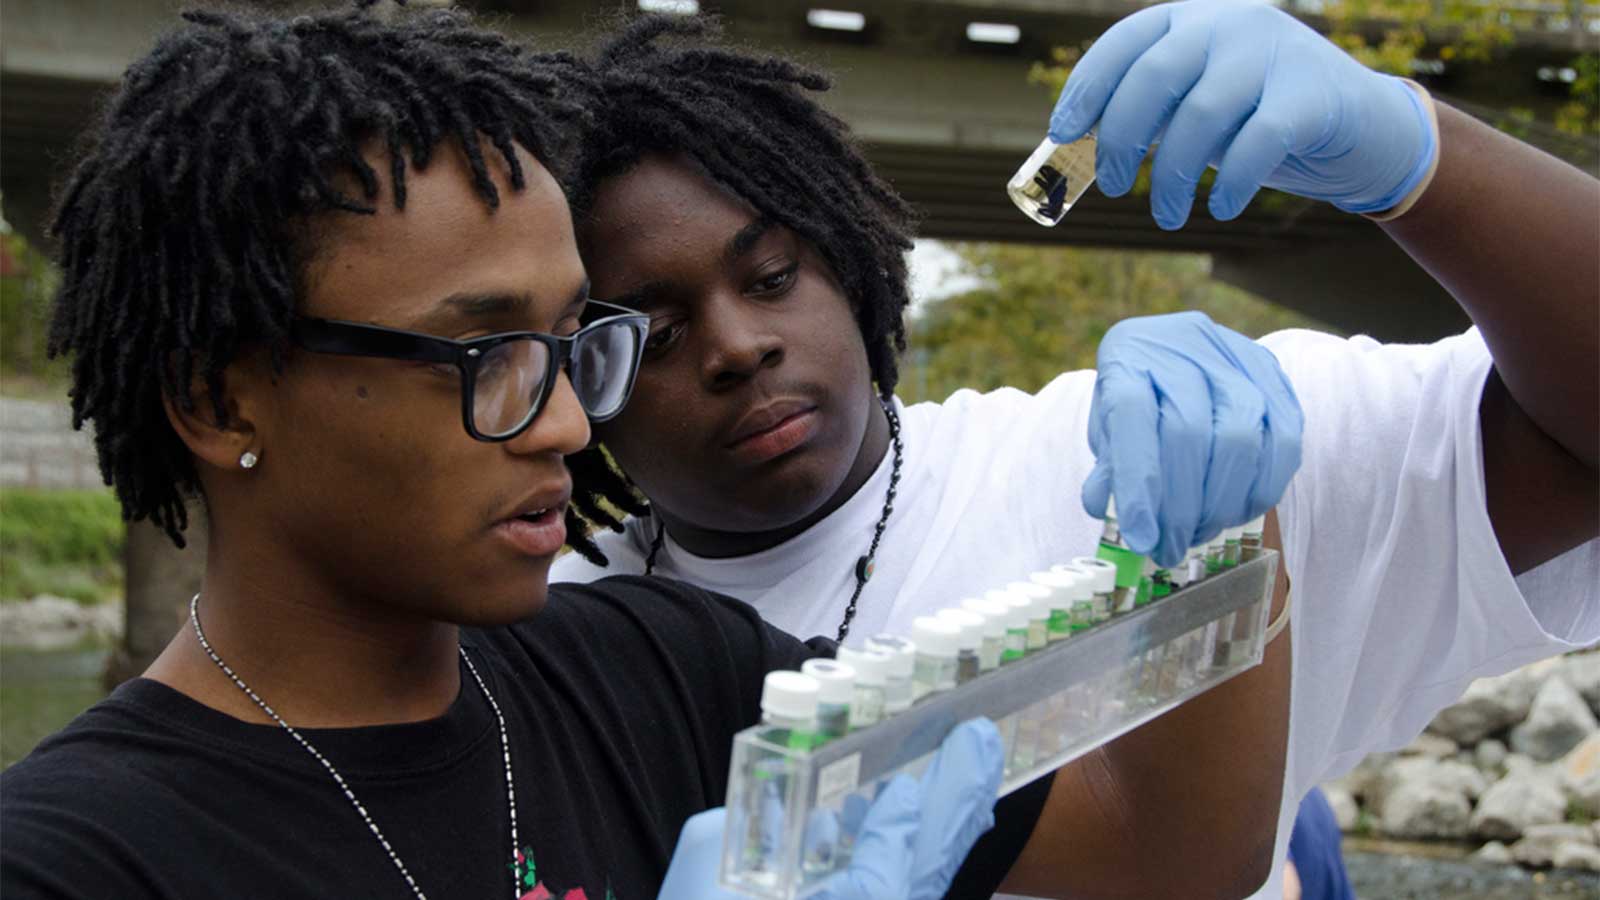 High school students help with water monitoring and river cleanup